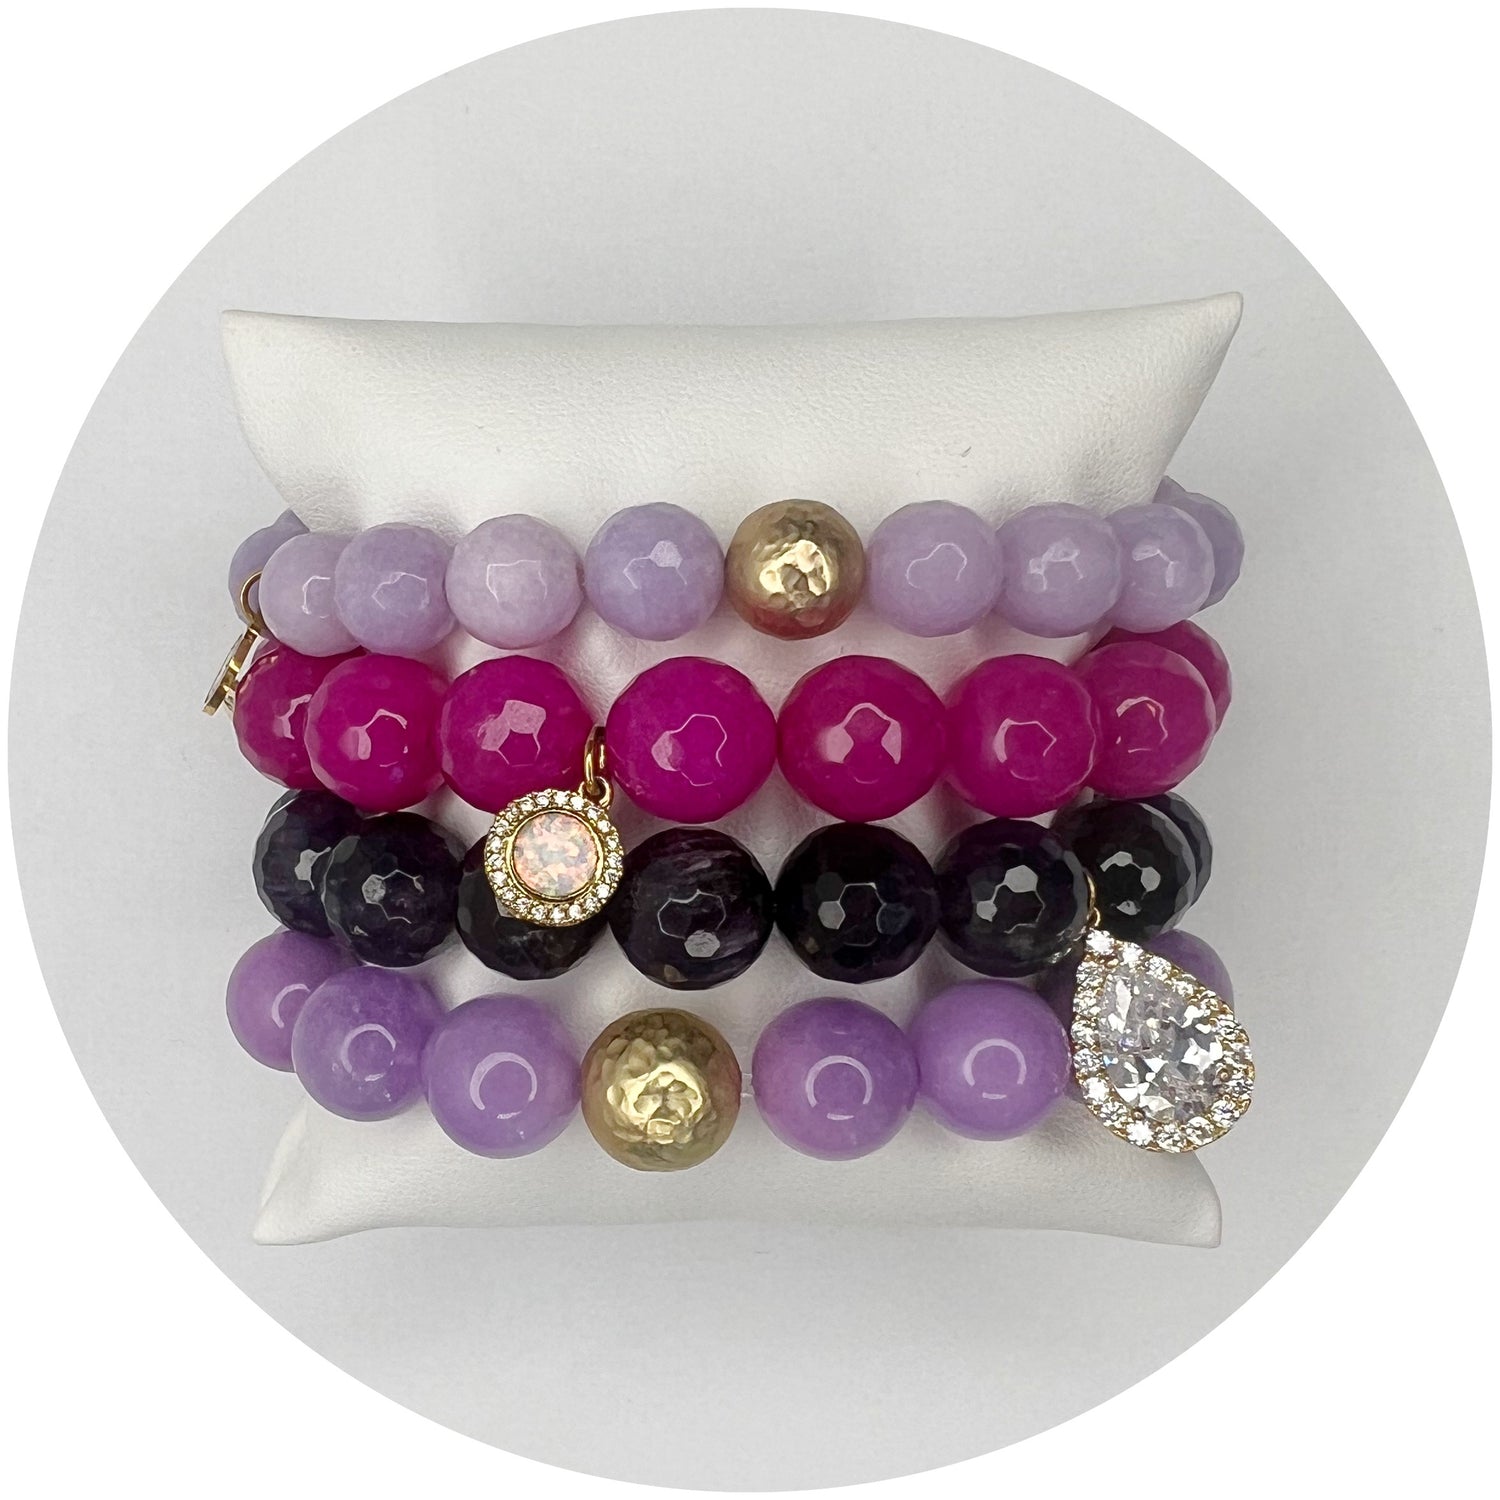 Plumtastic Armparty